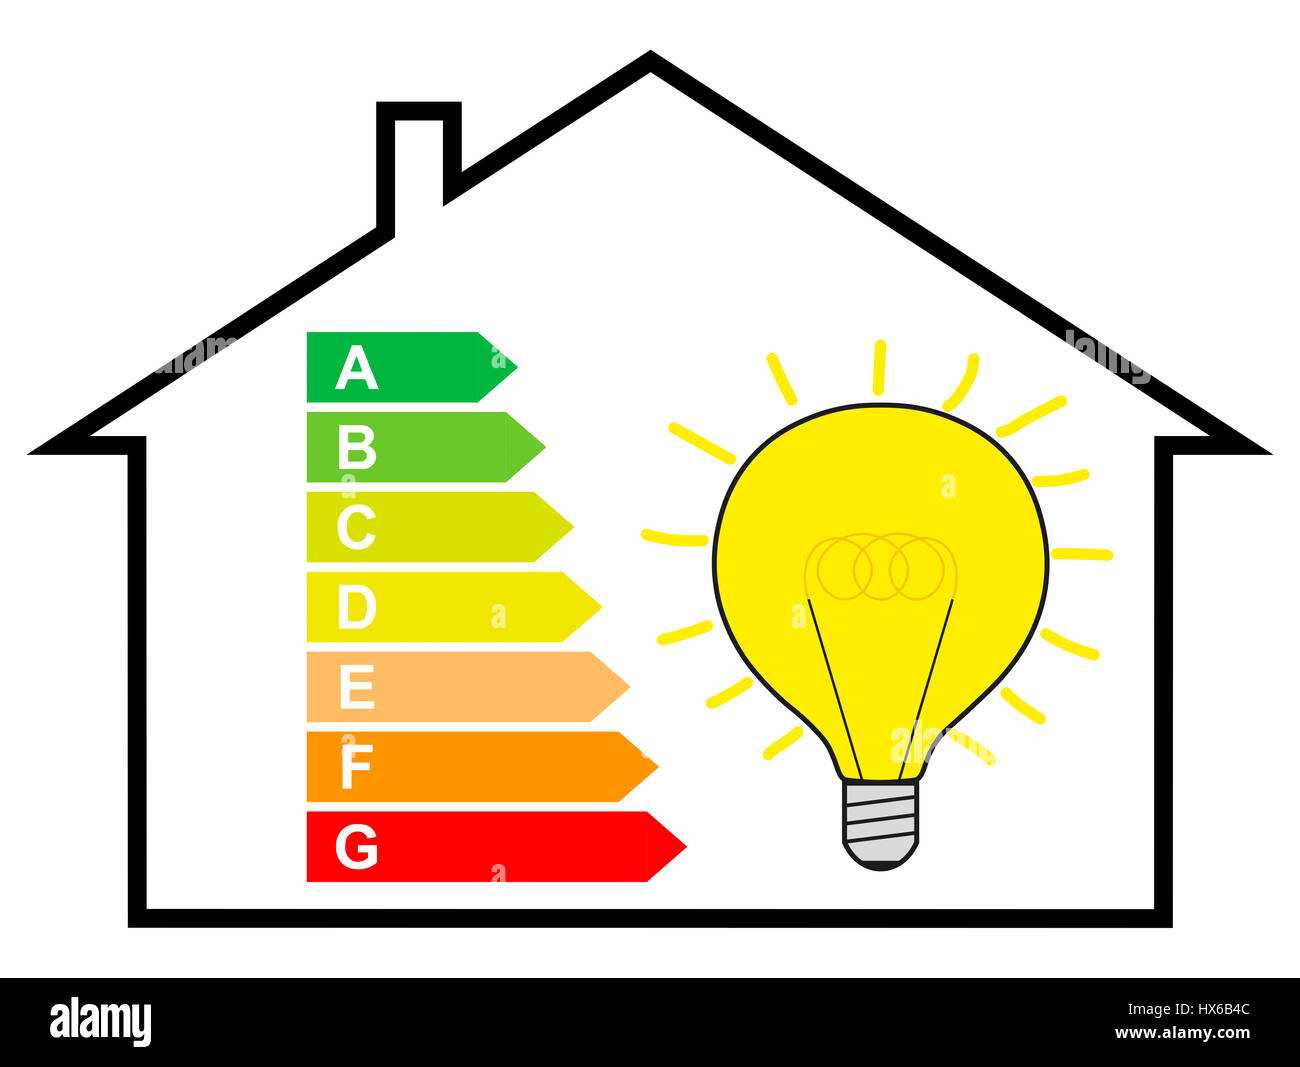 Energy Revolution, Energy saving, House with Energy Label and Bulb Stock Photo